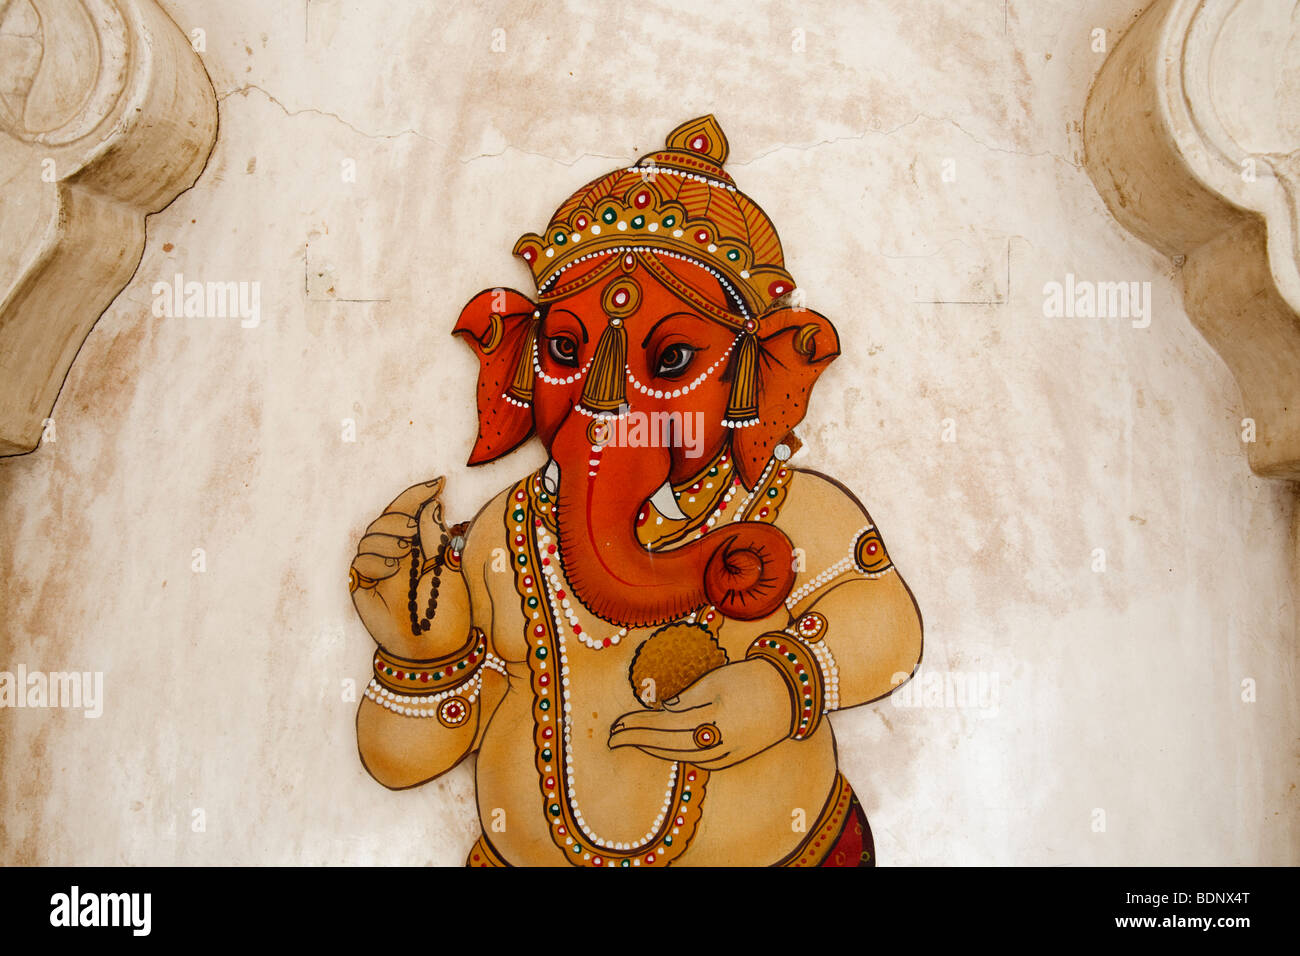 A wall painting of Ganesh, Indian Elephant God, at the City Palace, Udiapur, India Stock Photo